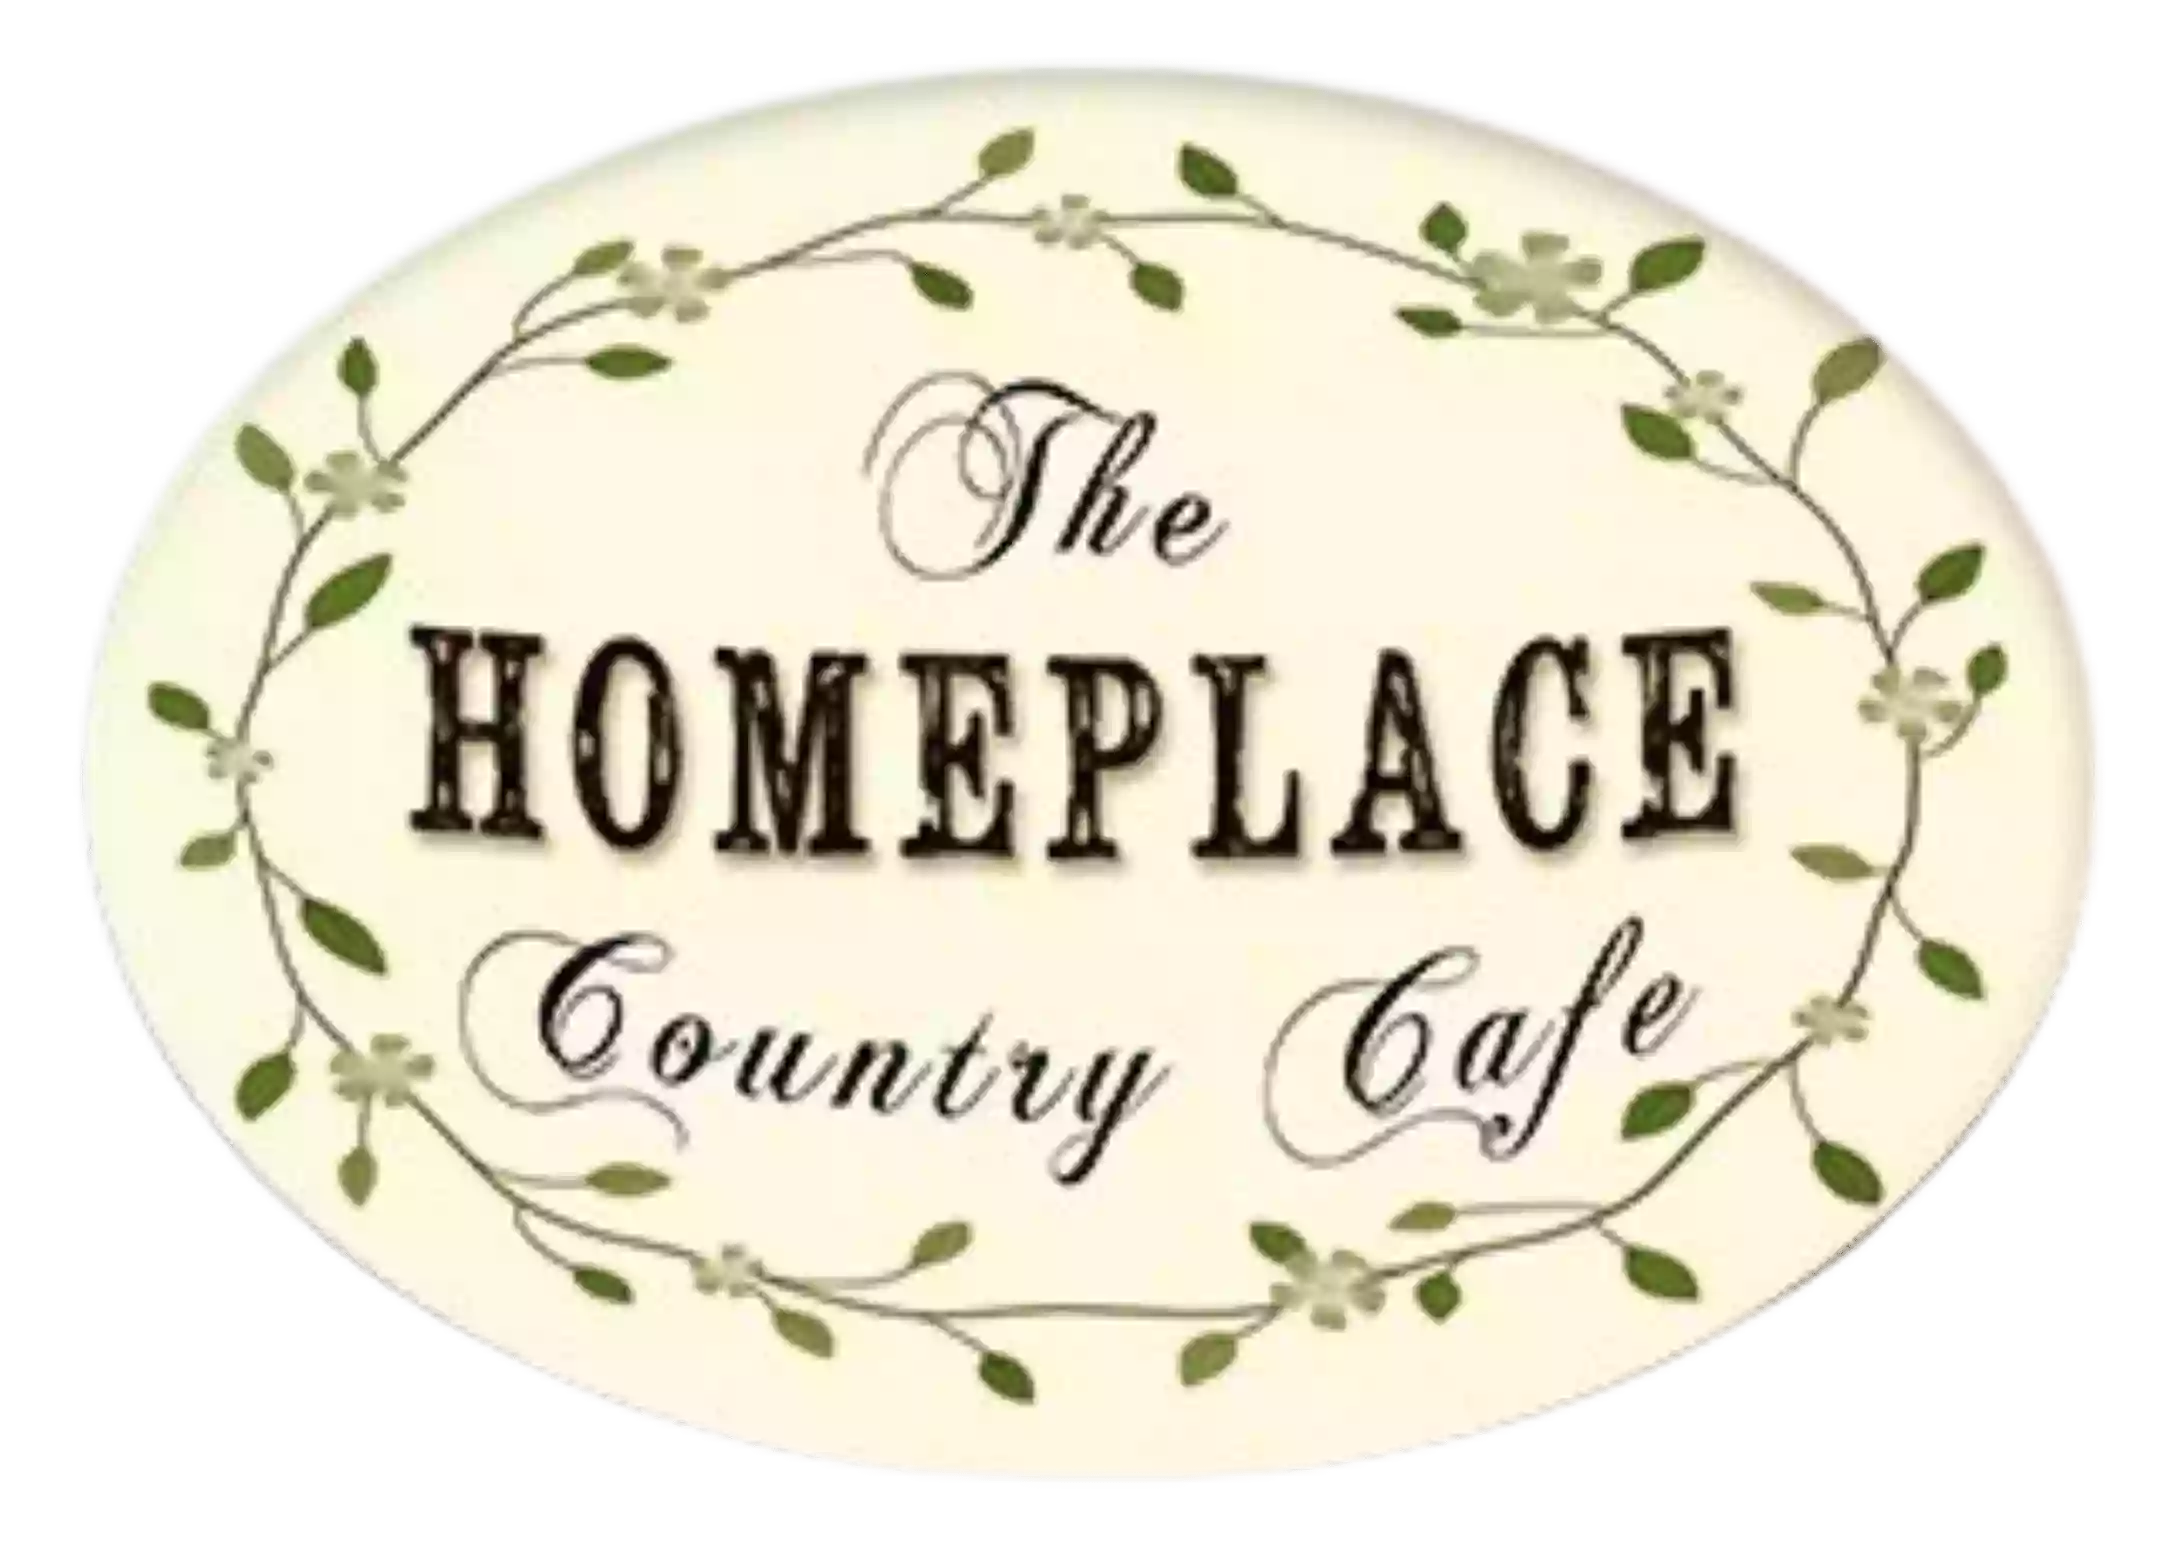 The Homeplace Cafe